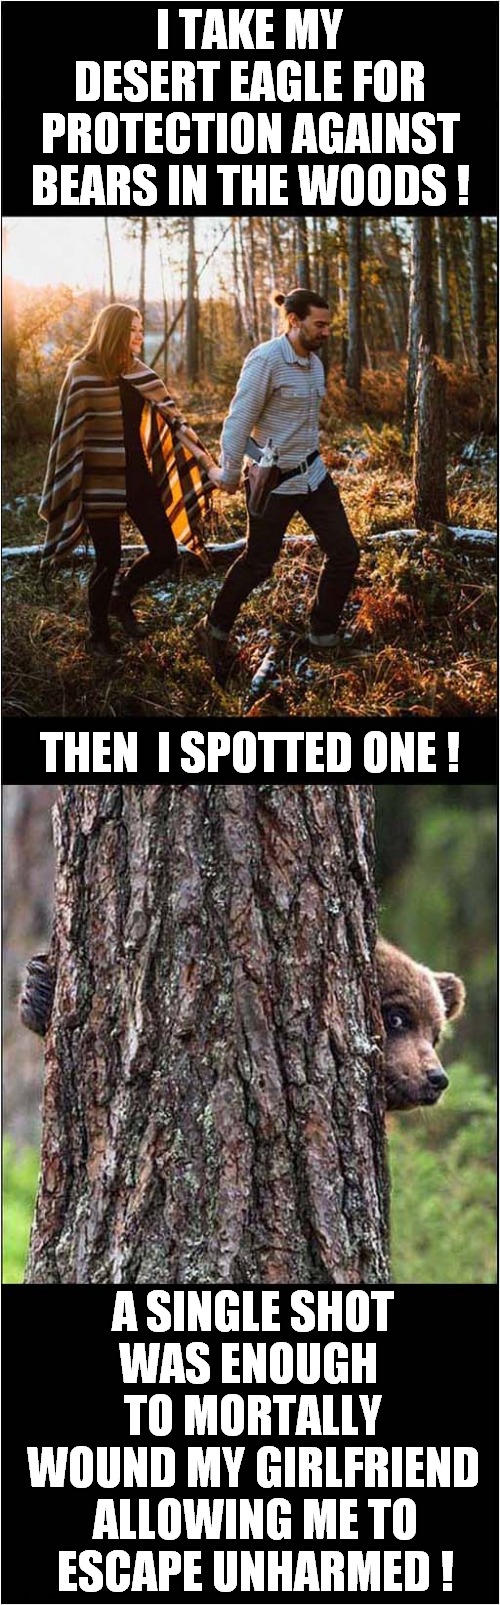 Creative Use Of A Desert Eagle ? | I TAKE MY DESERT EAGLE FOR PROTECTION AGAINST BEARS IN THE WOODS ! THEN  I SPOTTED ONE ! A SINGLE SHOT WAS ENOUGH  TO MORTALLY WOUND MY GIRLFRIEND; ALLOWING ME TO ESCAPE UNHARMED ! | image tagged in couple,guns,bear,escape,dark humour | made w/ Imgflip meme maker